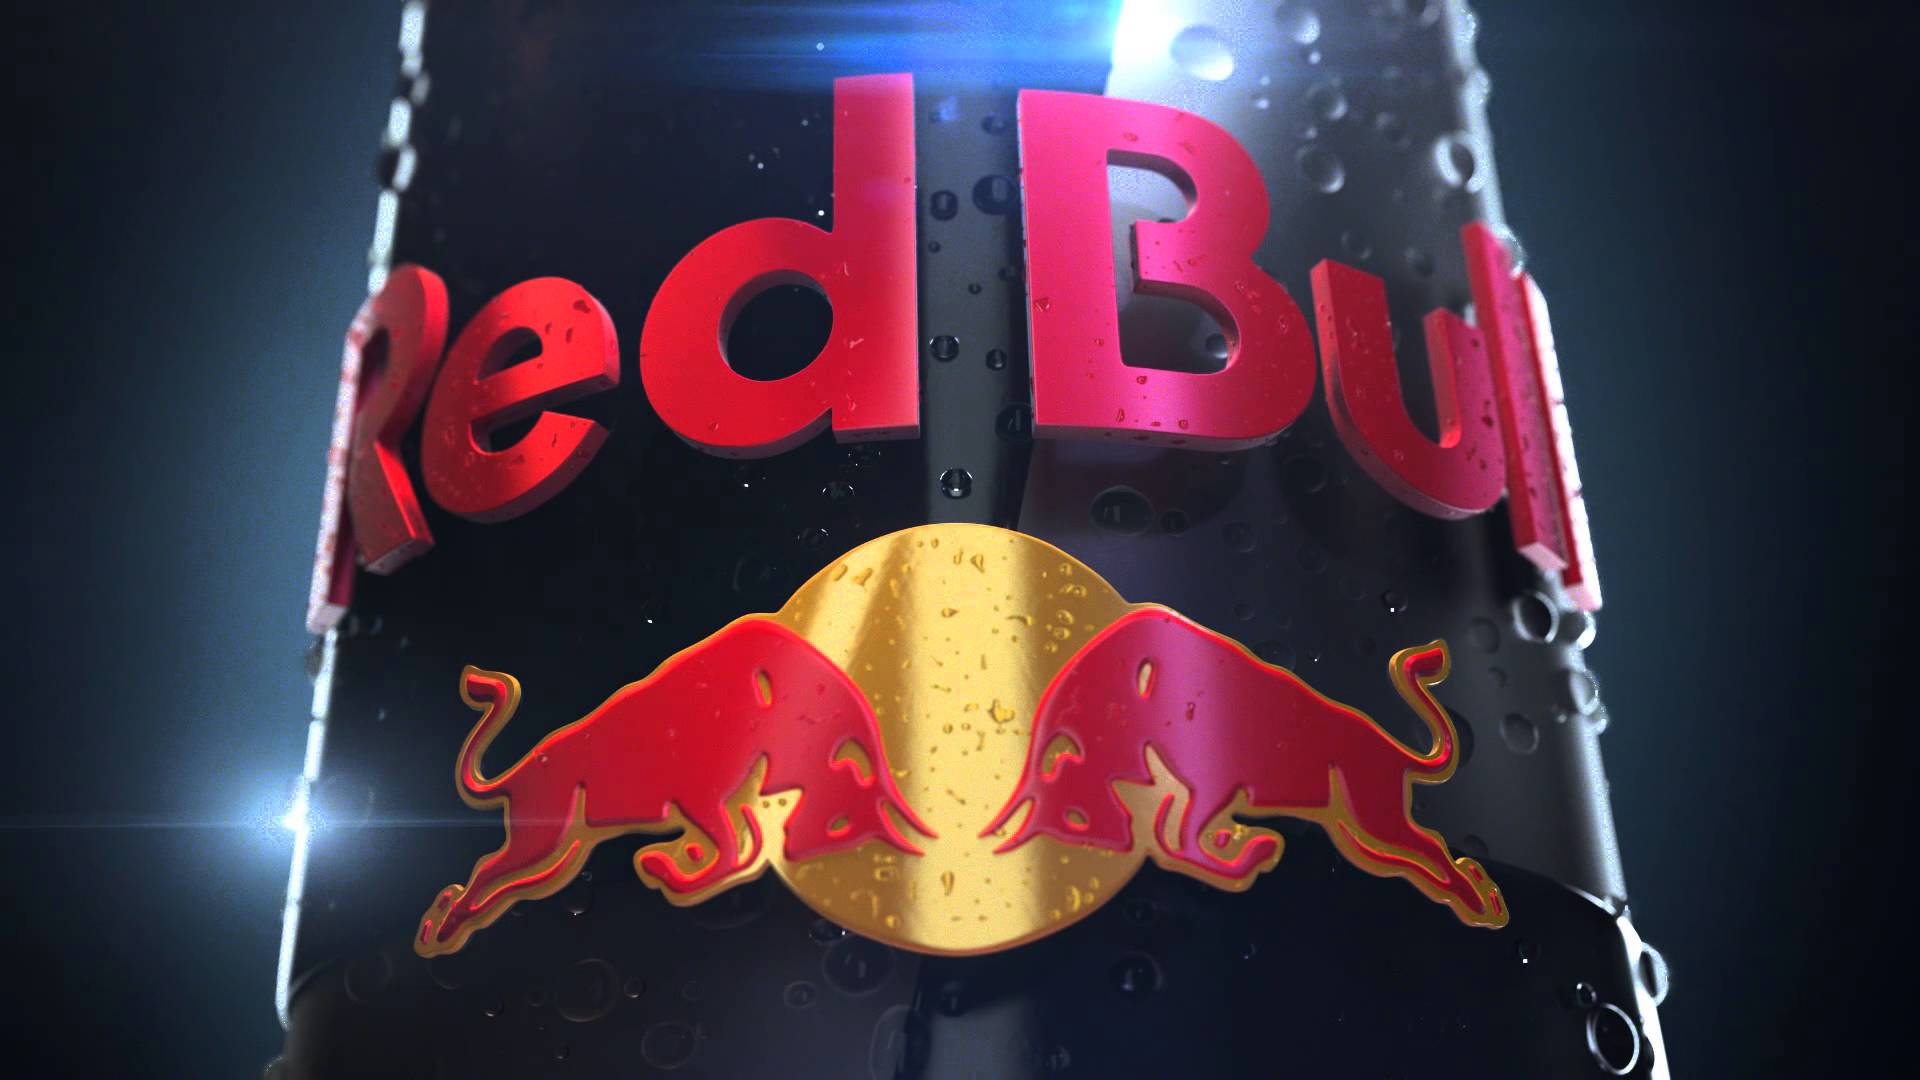 image about Red Bull Logos, Monster energy 1024×768